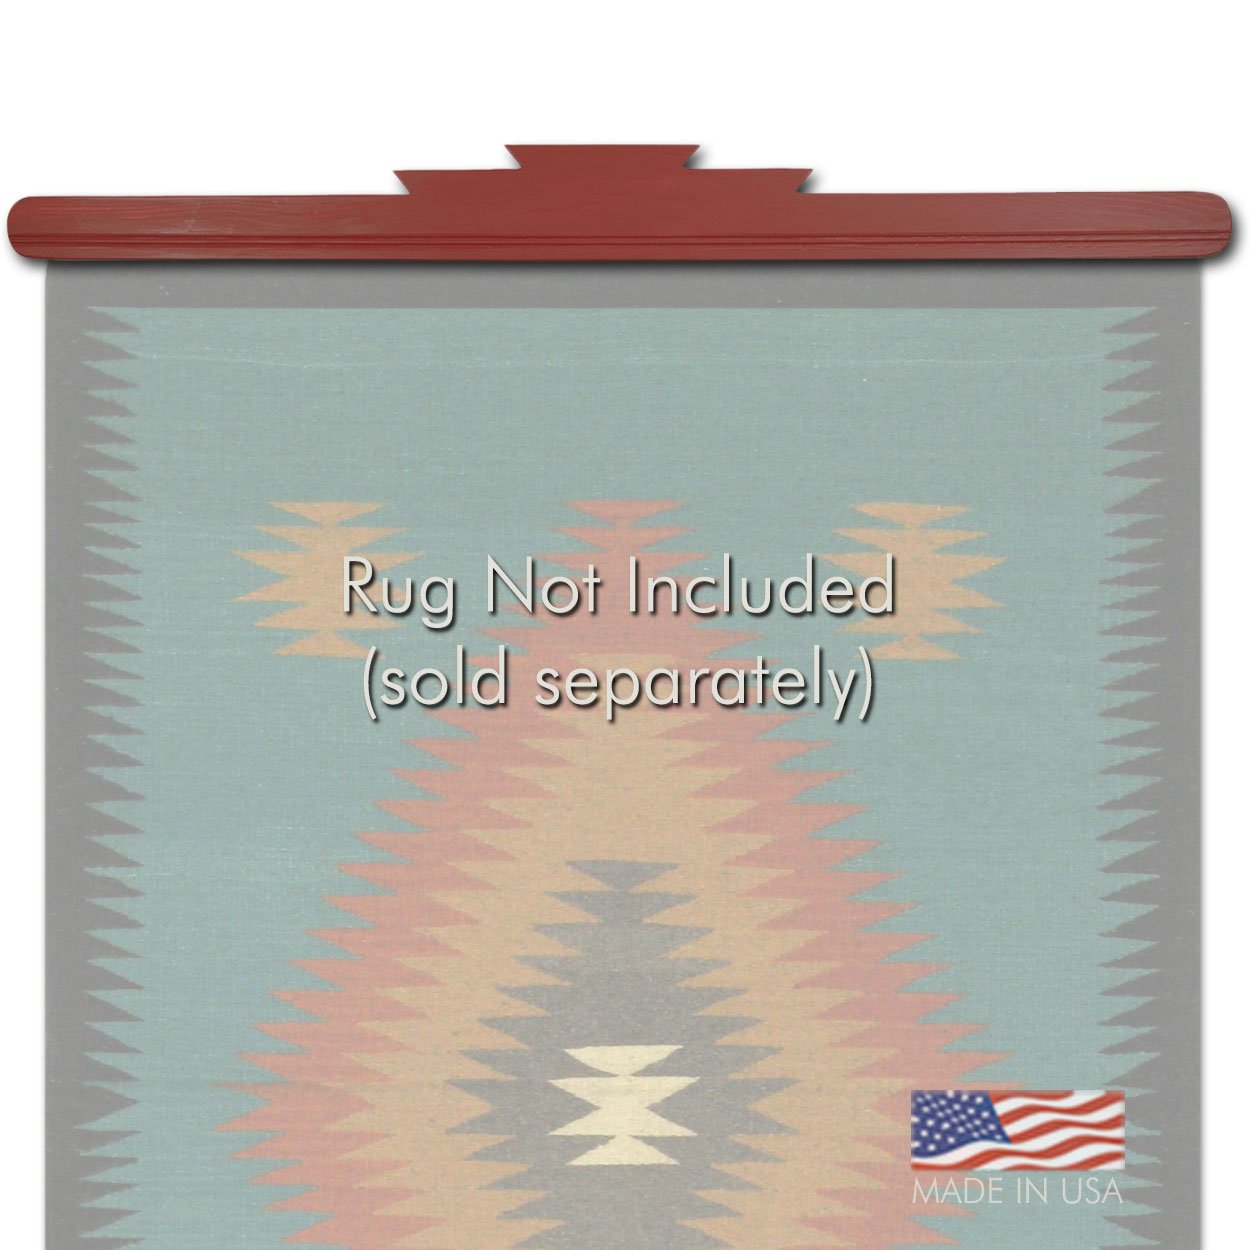 Wall Mount Rug or Quit Hanger in Turquoise Pine with Santa Fe